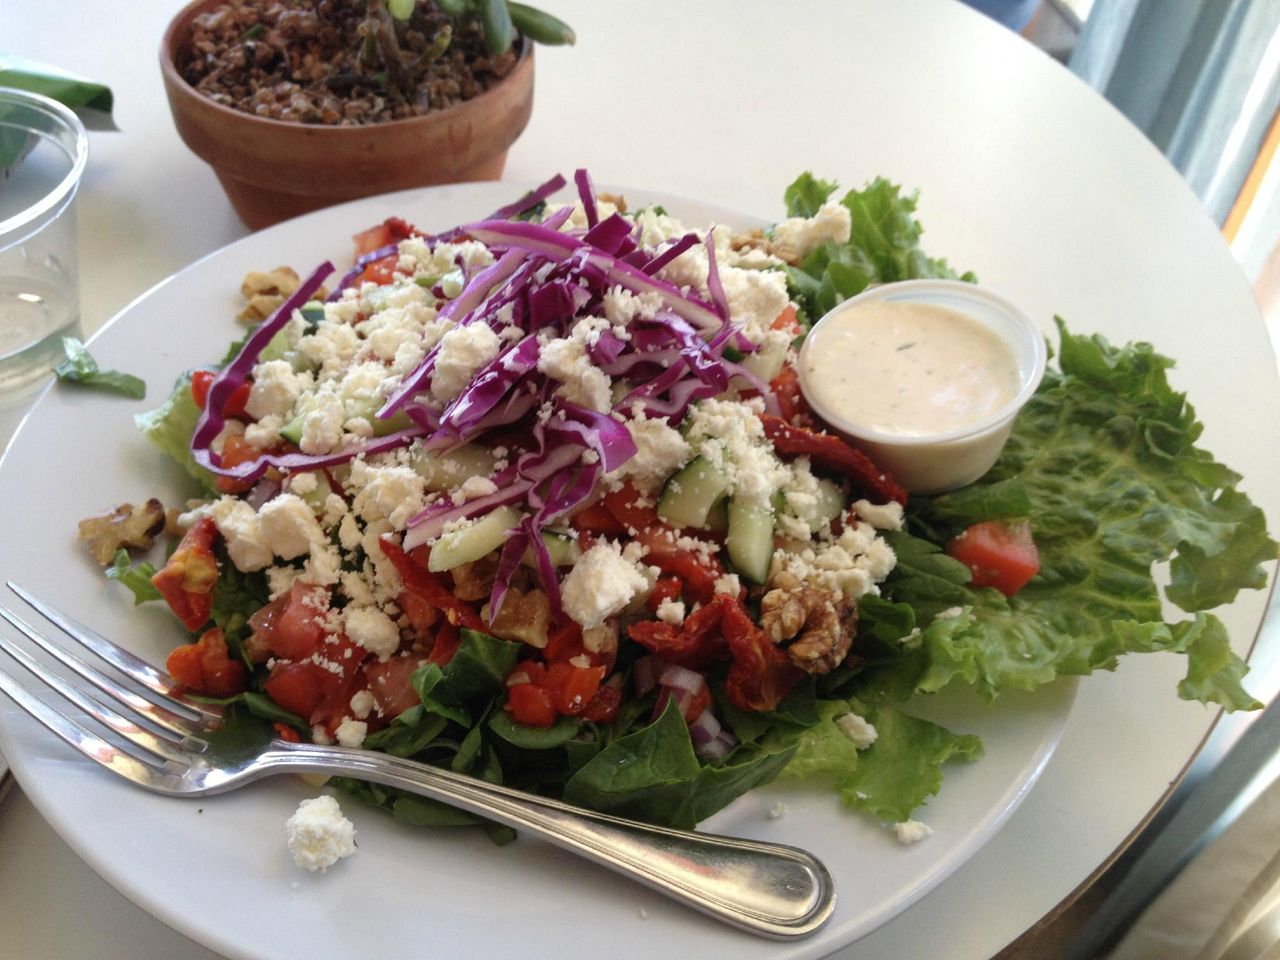 The chopped salad, full of good things!